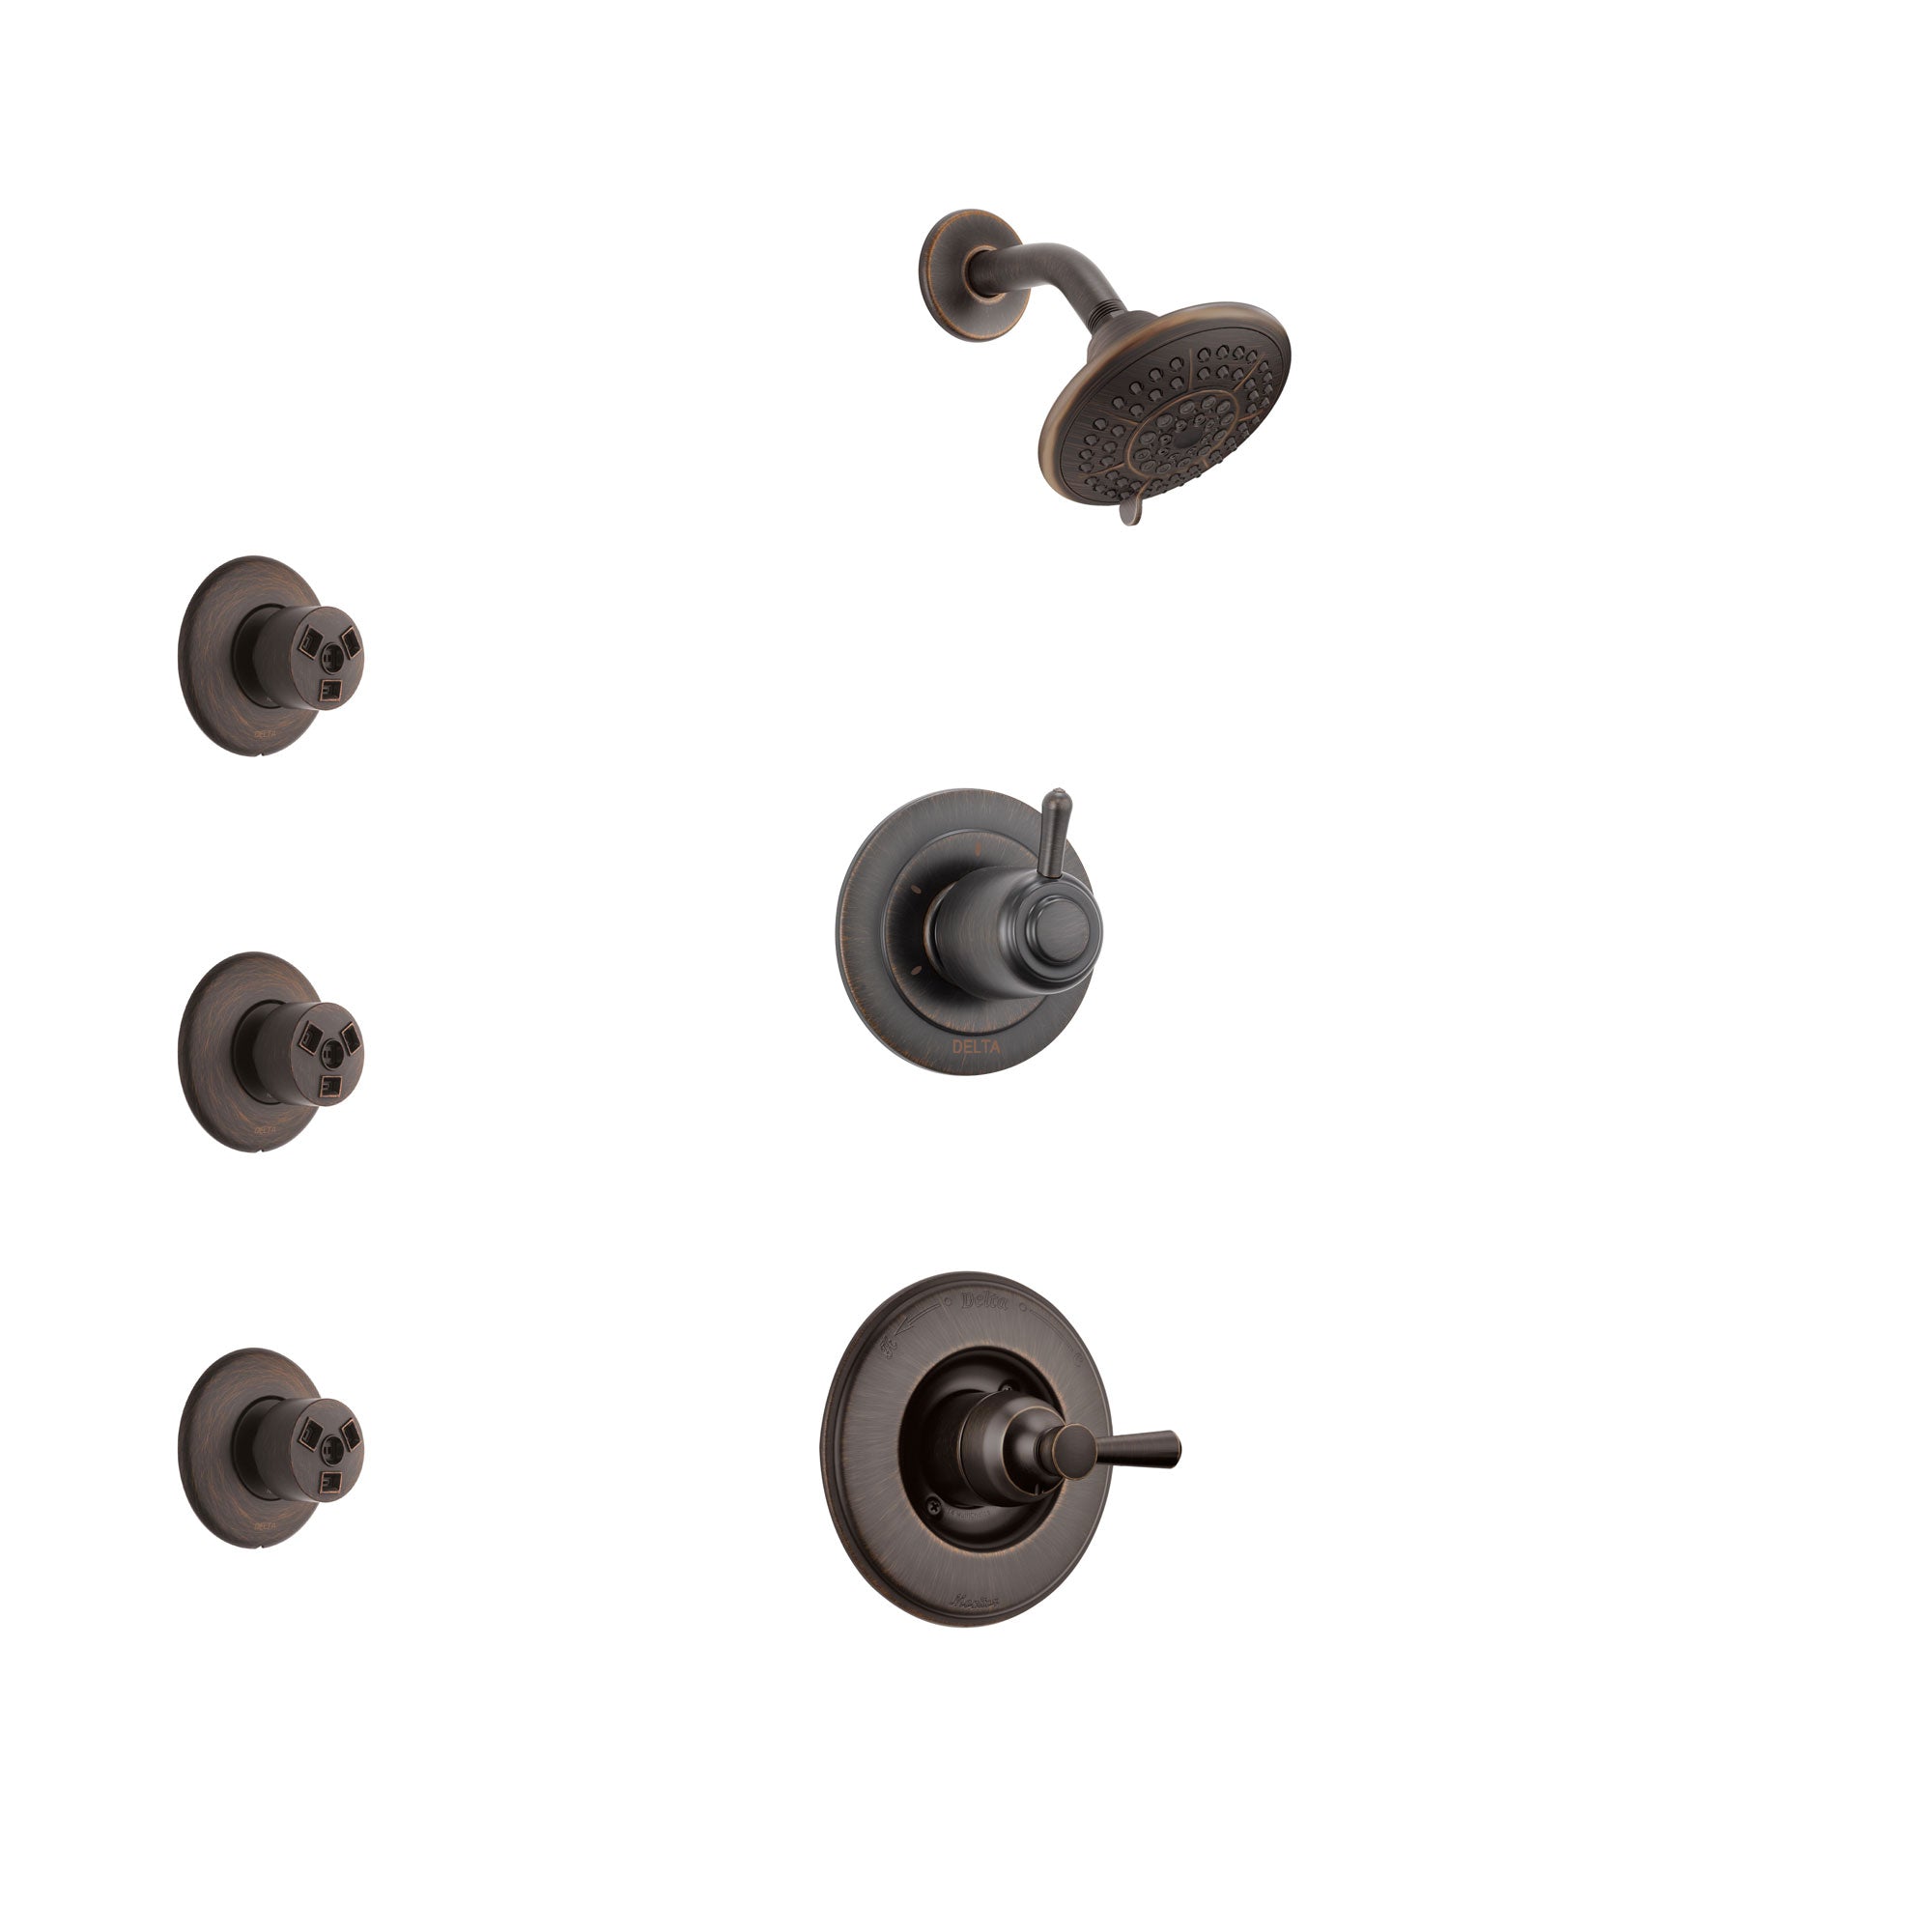 Delta Linden Venetian Bronze Finish Shower System with Control Handle, 3-Setting Diverter, Showerhead, and 3 Body Sprays SS14293RB2